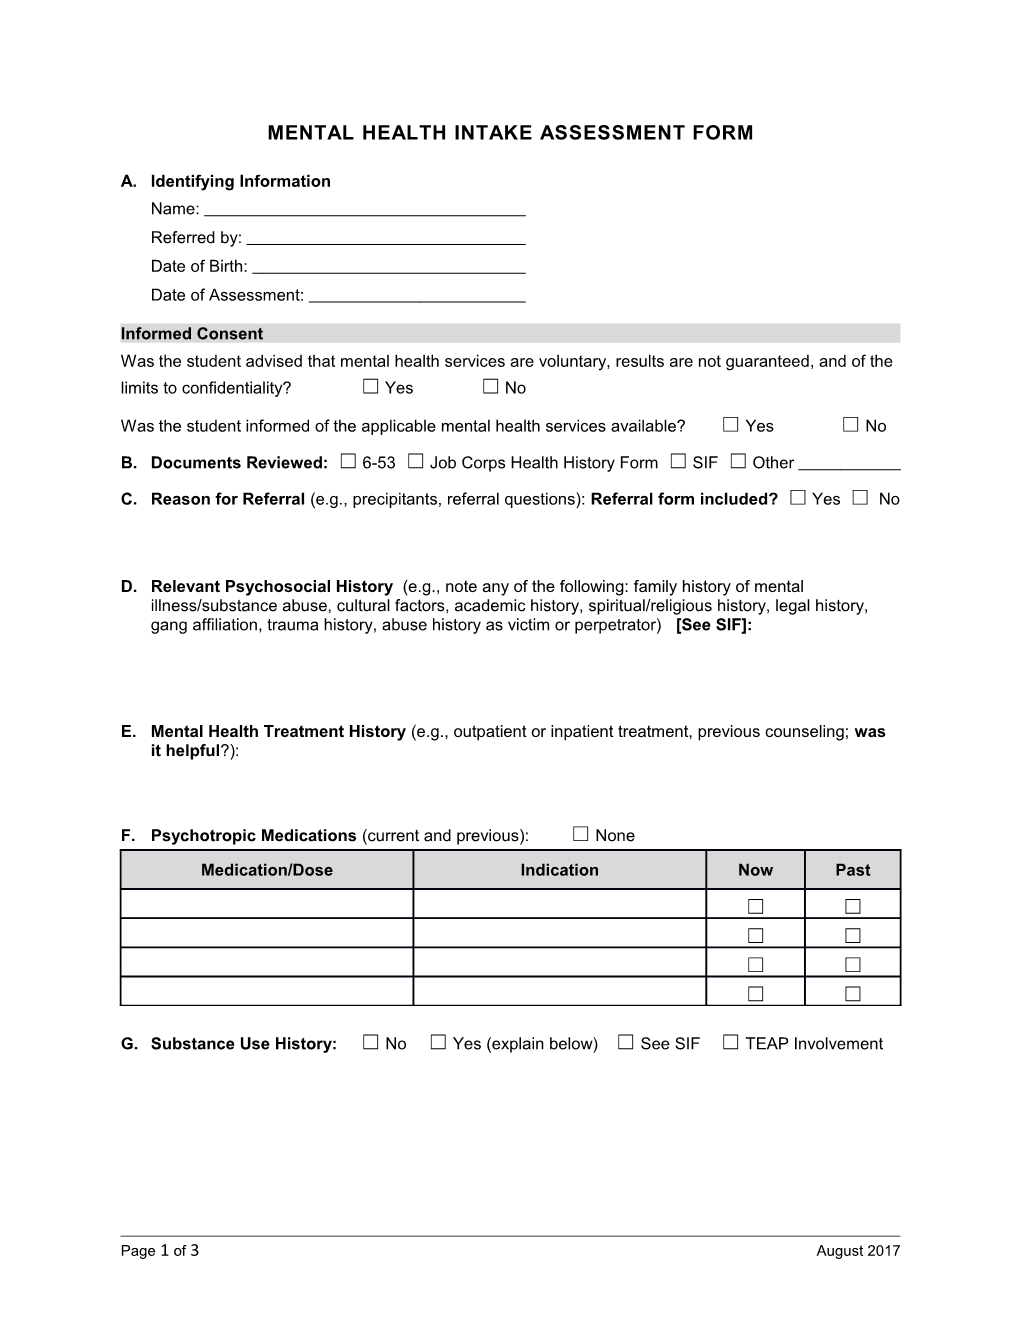 MH Intake Assessment Form